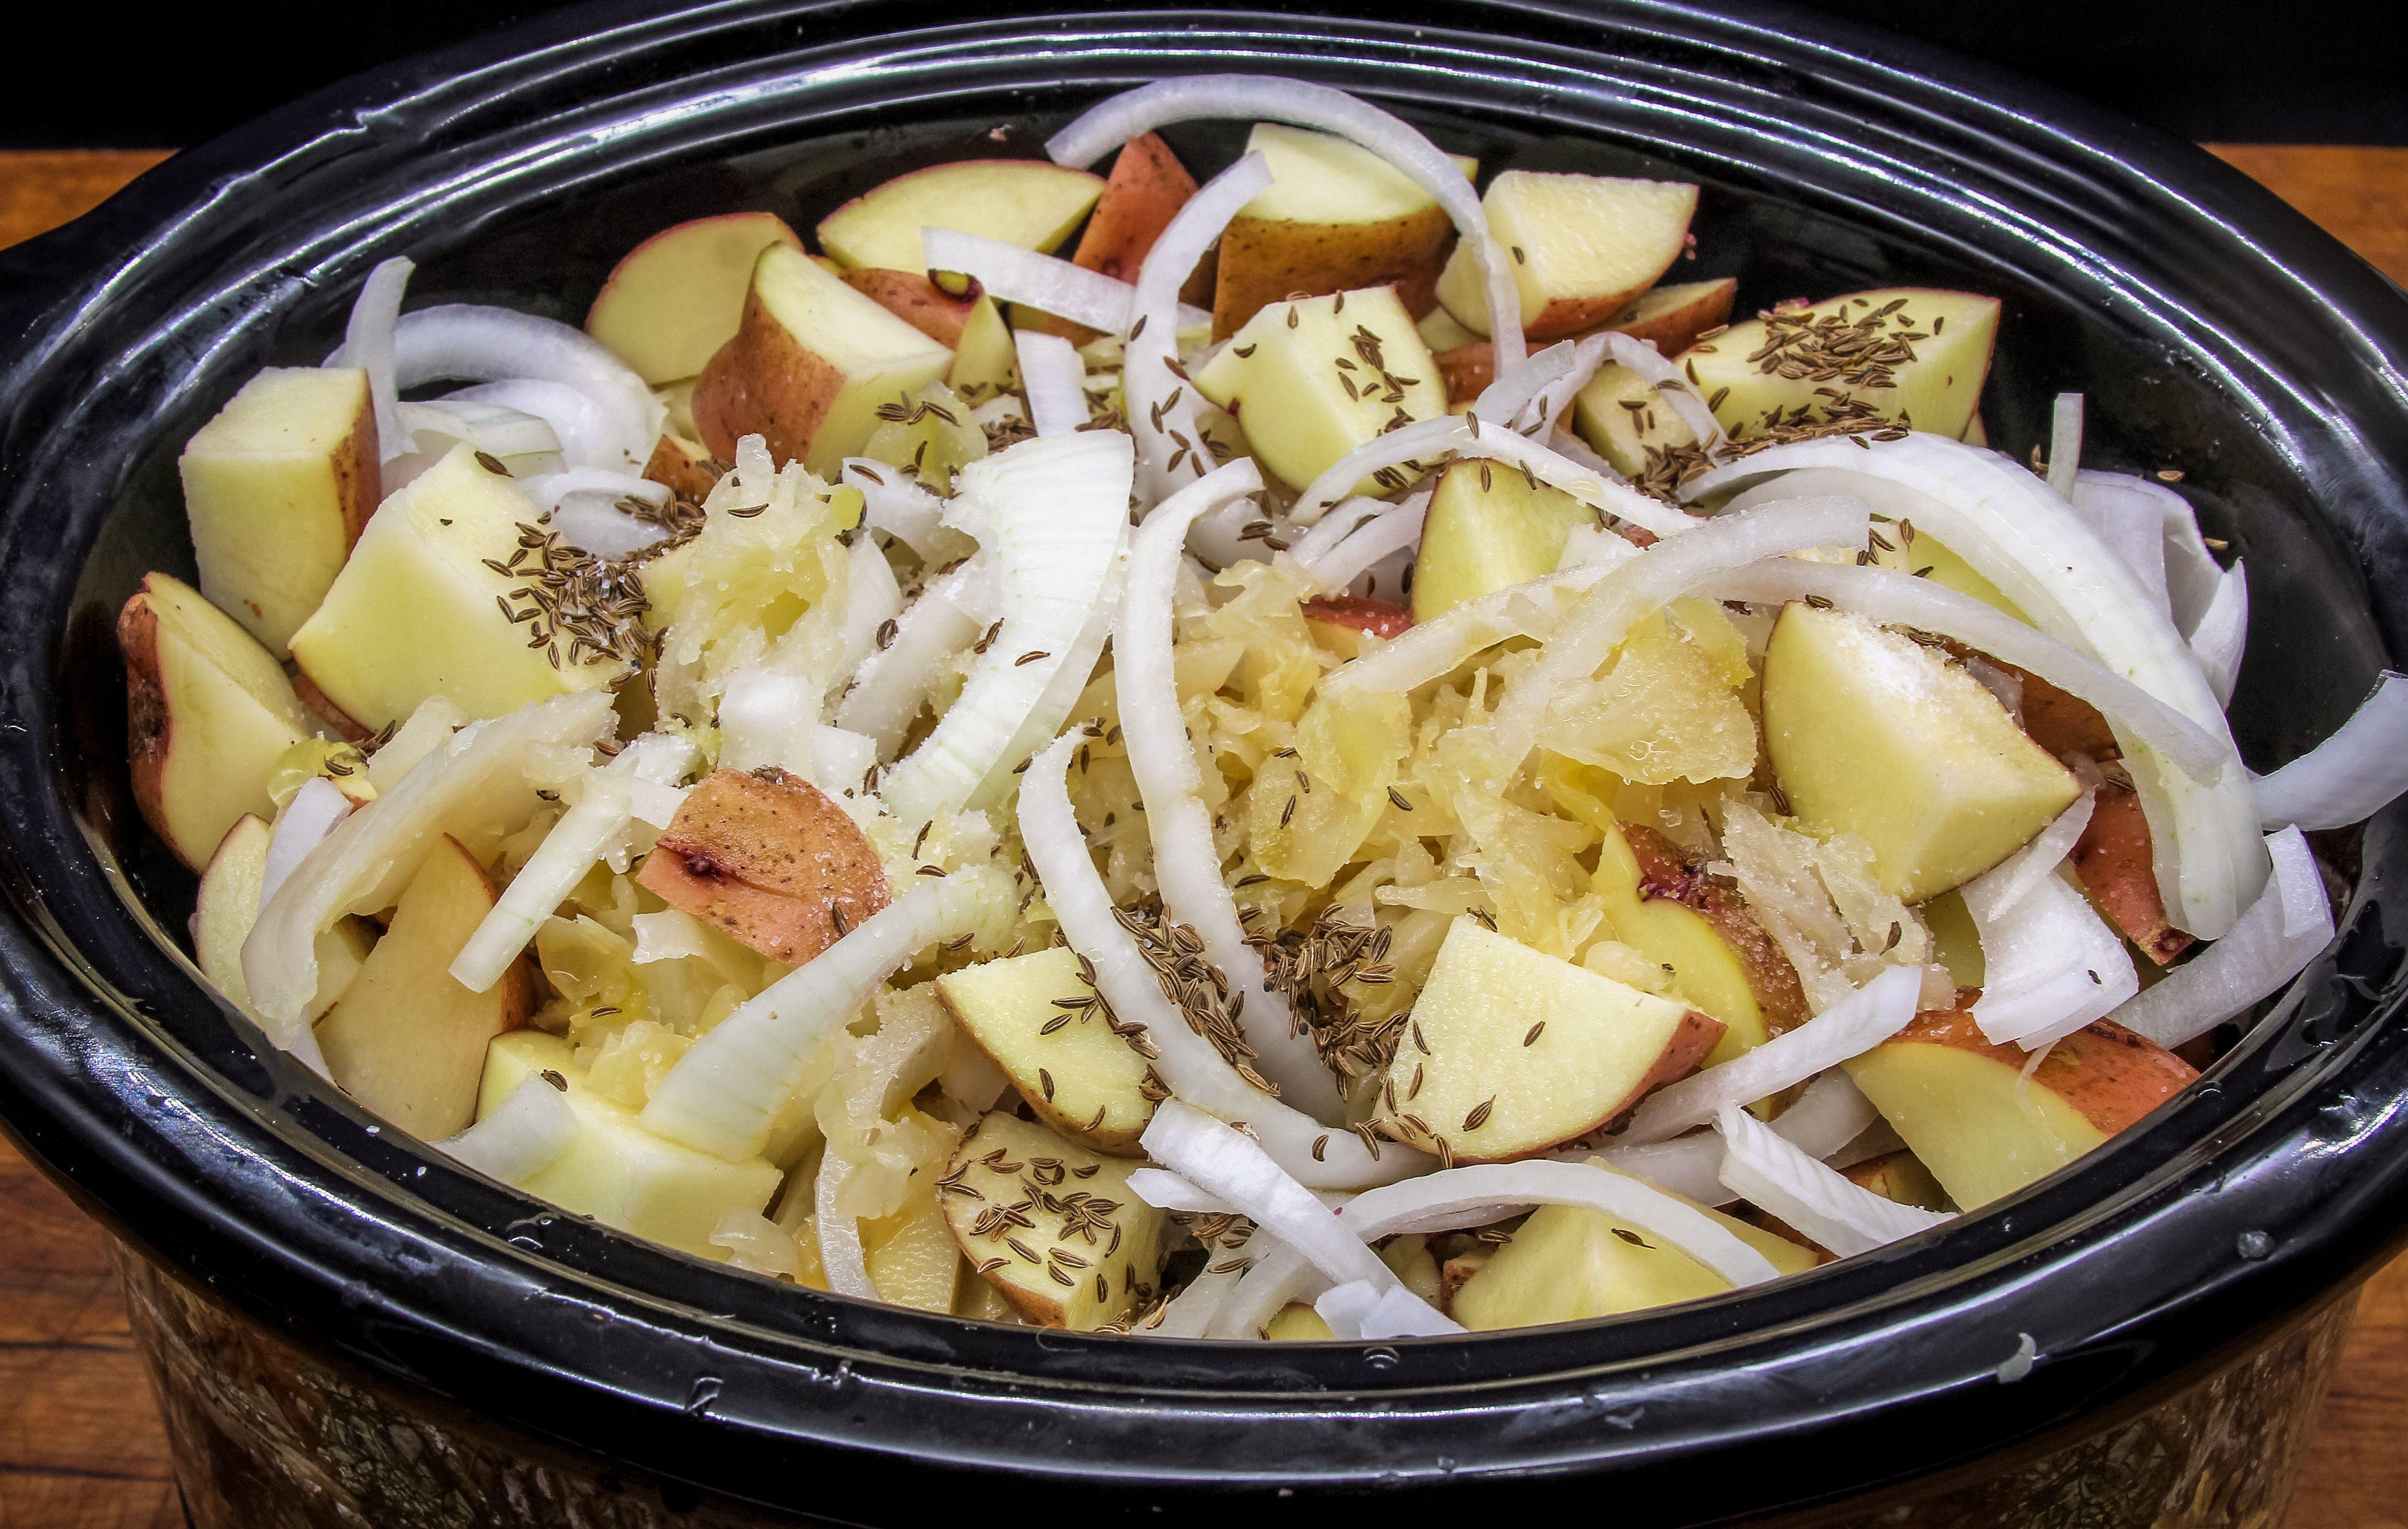 Add the seared venison, sauerkraut, potatoes, onions and seasonings to the slow cooker.